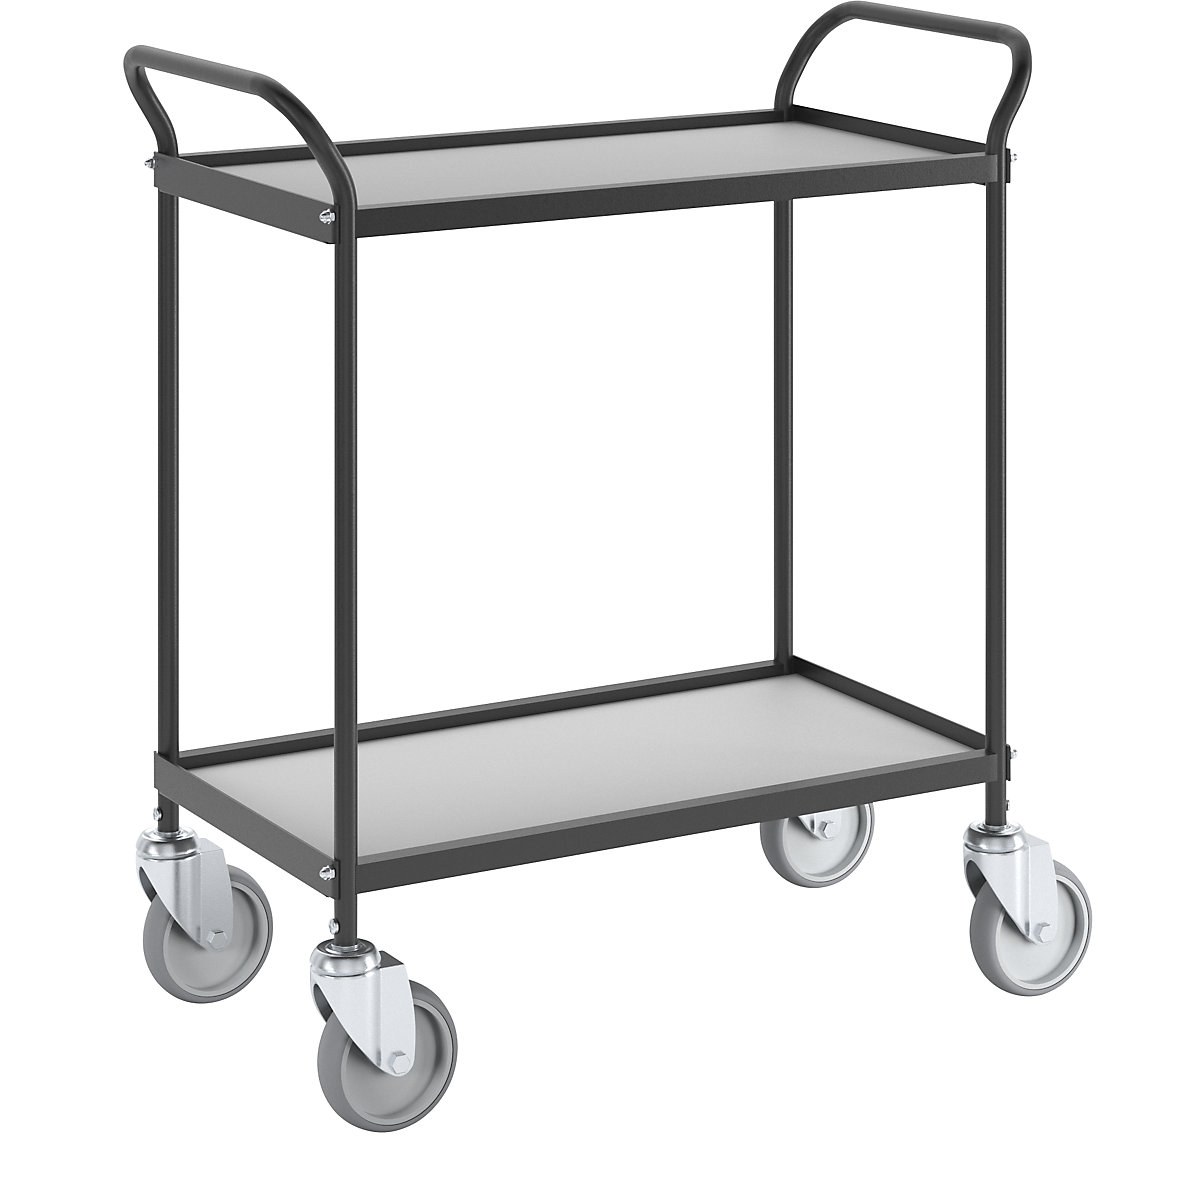 Serving trolley, LxWxH 780 x 380 x 880 mm, 2 shelves, 2+ items-2